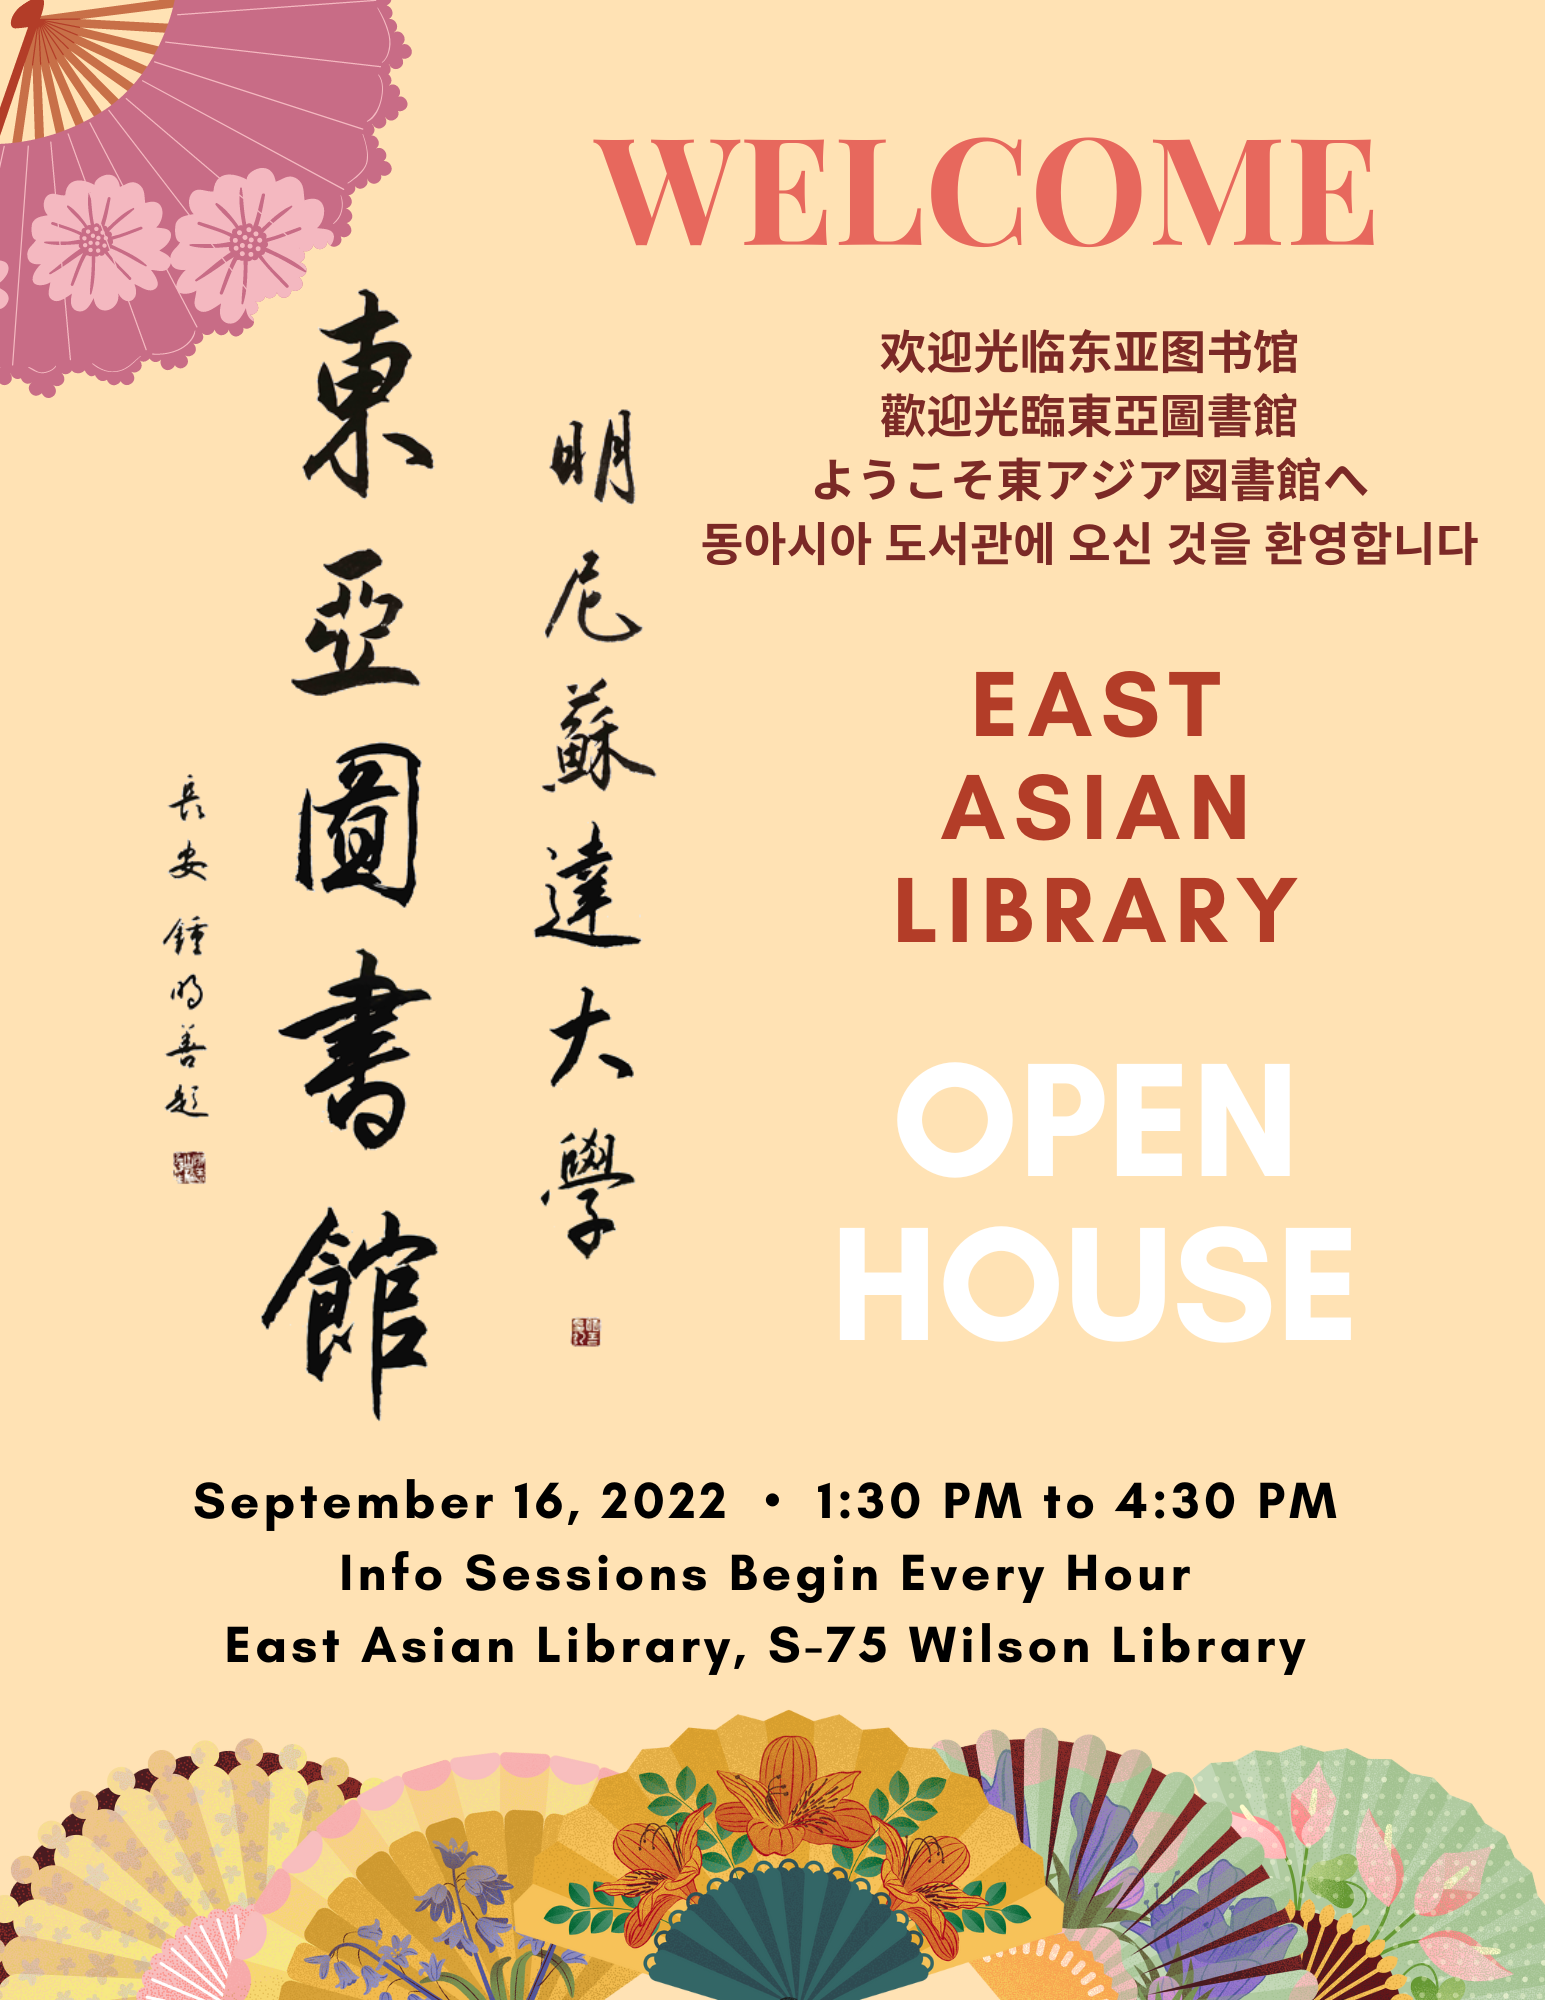 East Asian Library Open House Flyer